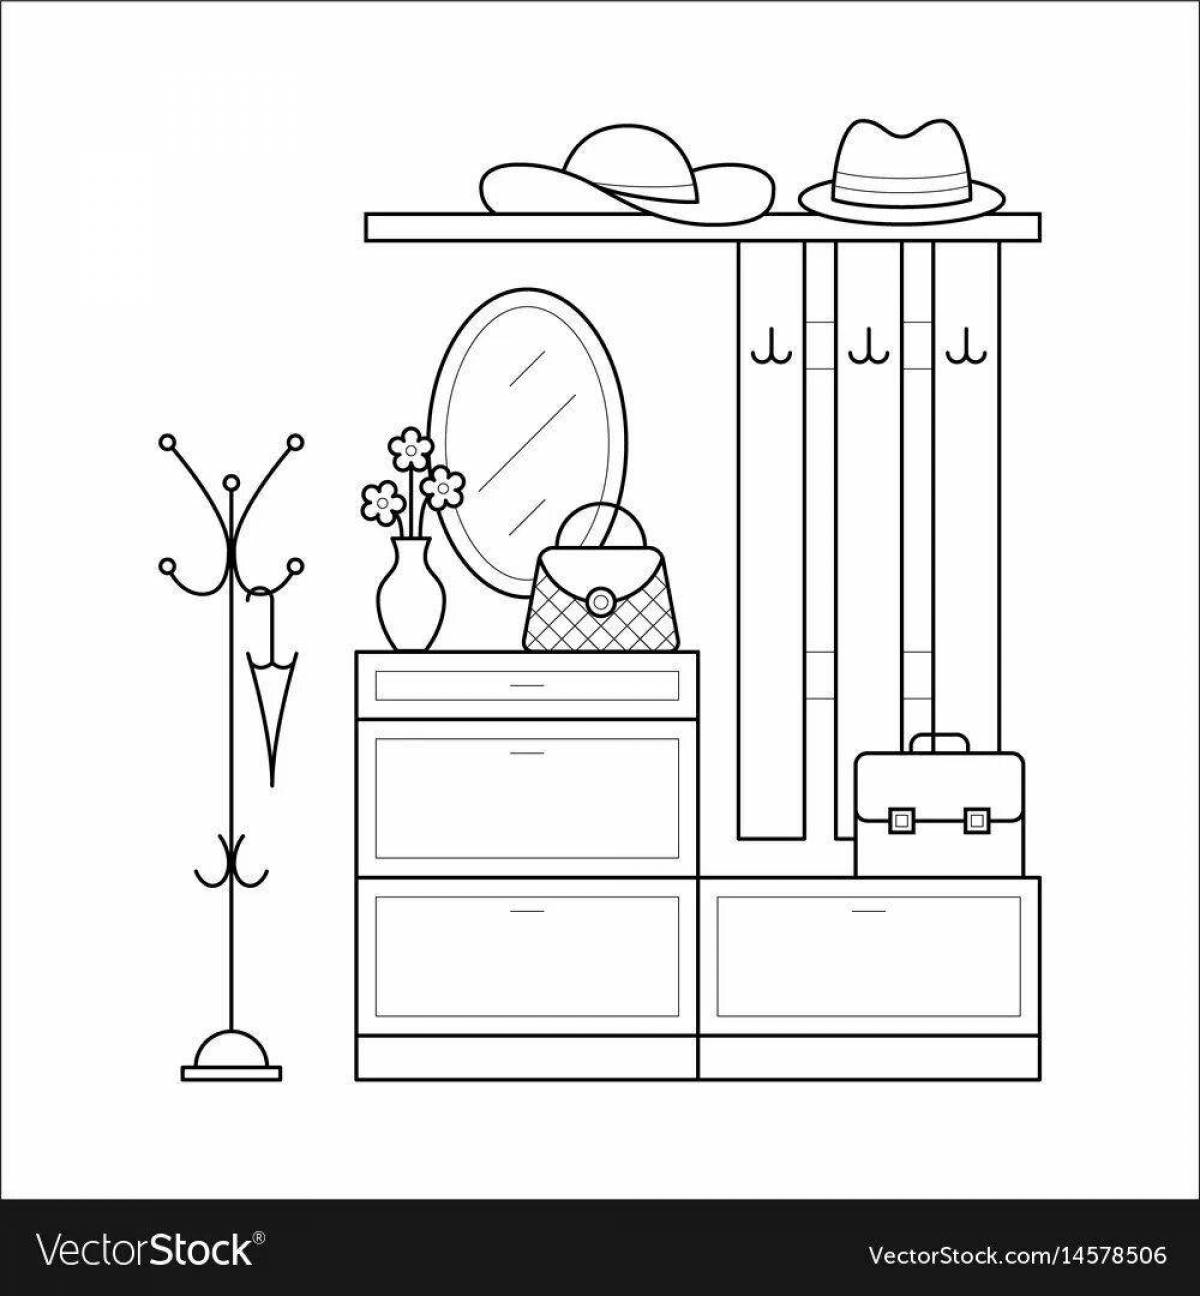 Playful wardrobe coloring book for 3-4 year olds